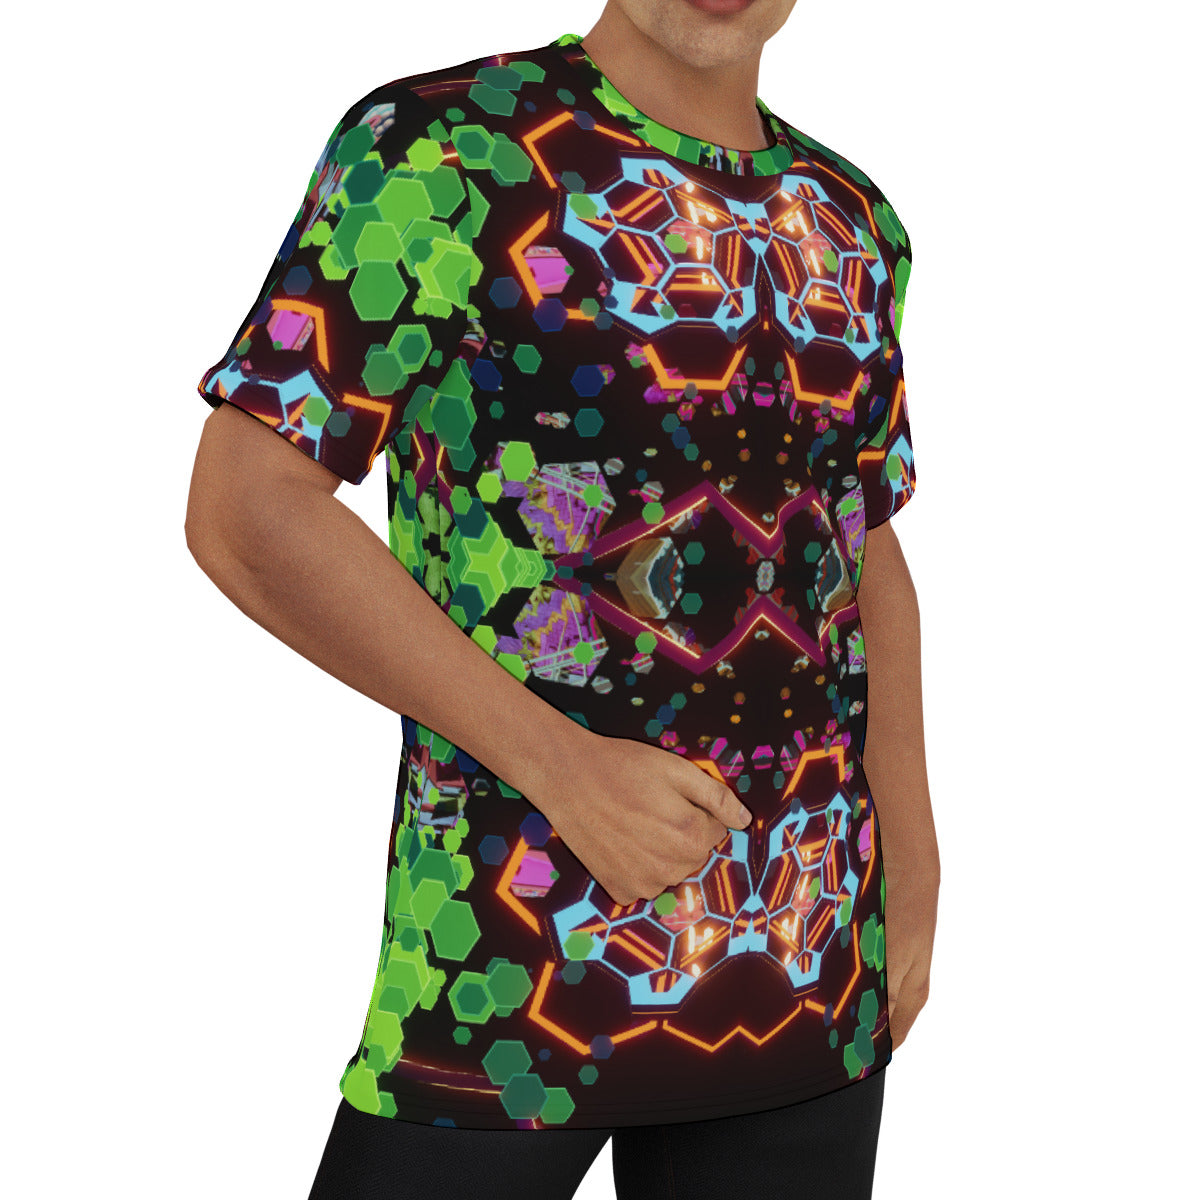 TidalFire 002 - Eco-friendly All-Over MicrodoseVR Print Men's Short Sleeve T-shirt